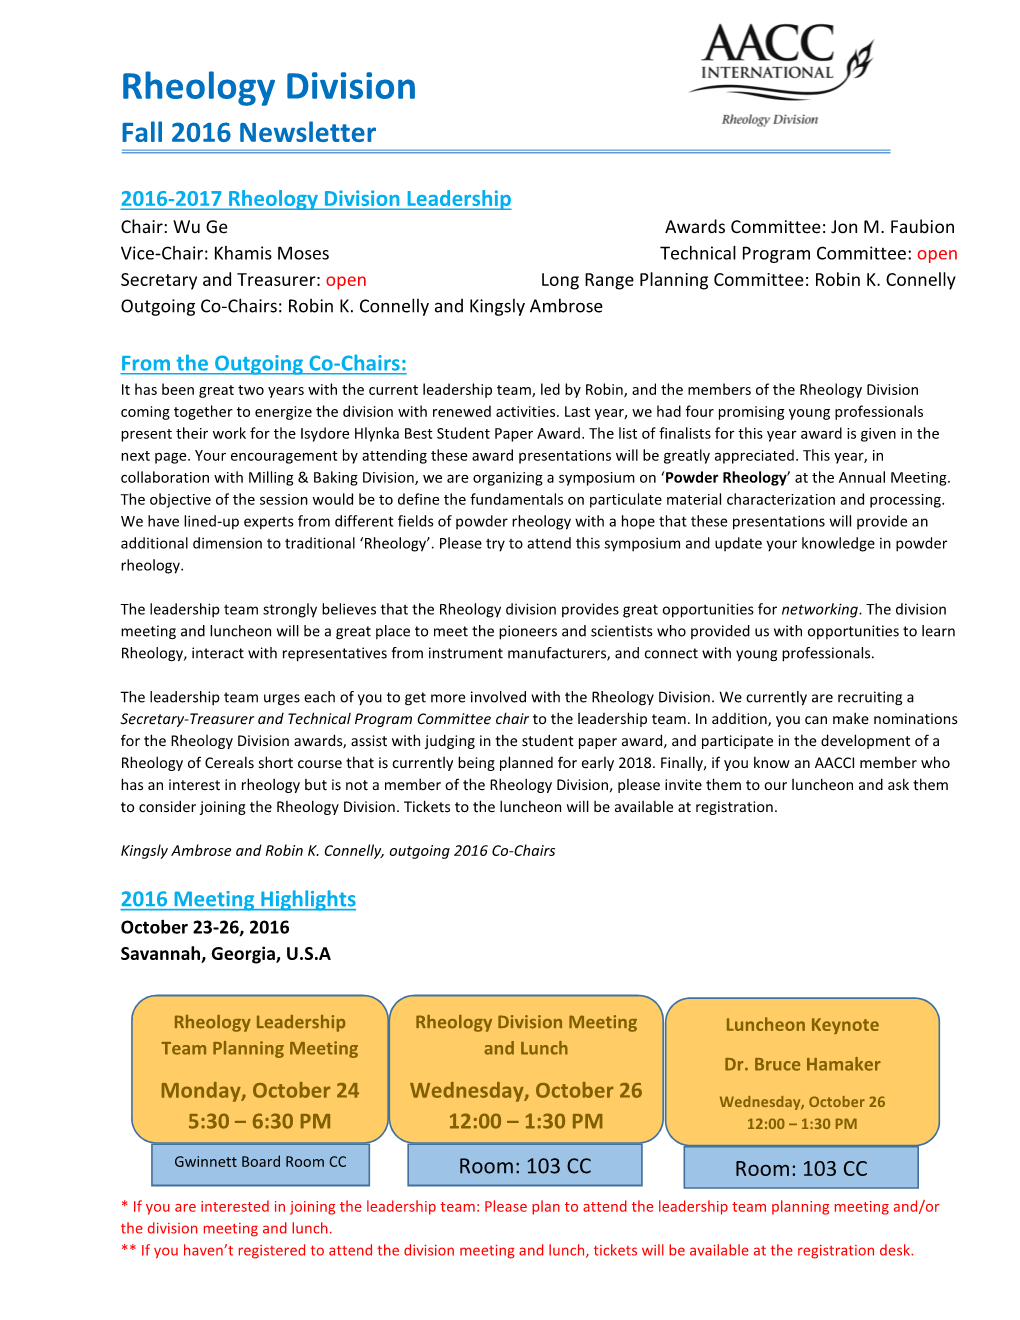 Rheology Division Fall 2016 Newsletter